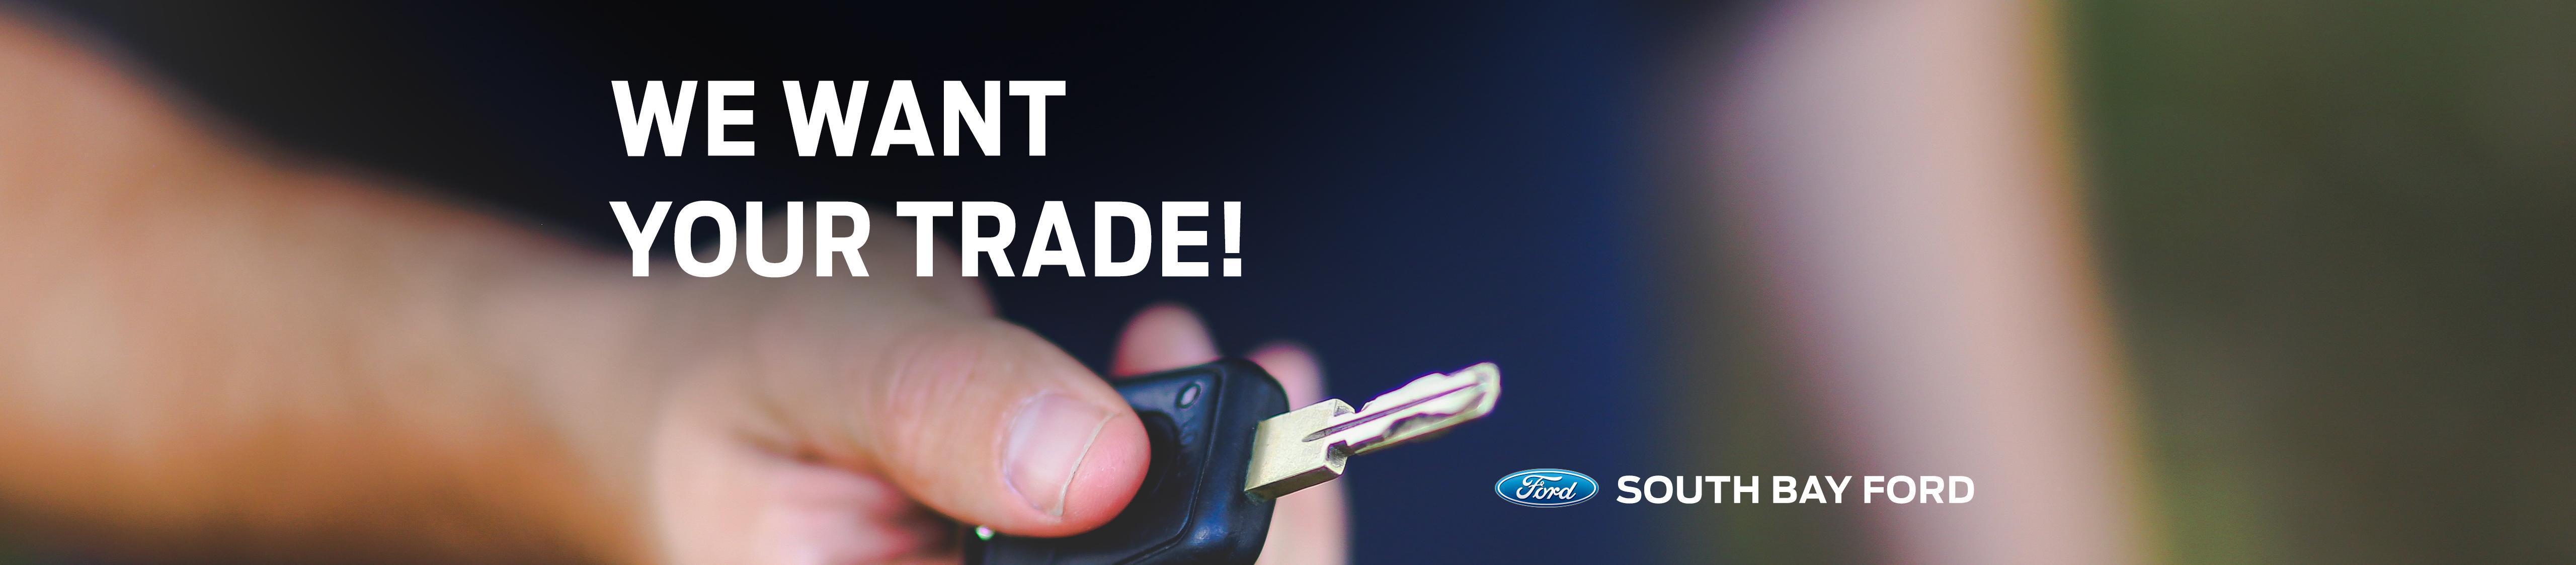 We want your trade at South Bay Ford in Hawthorne, CA